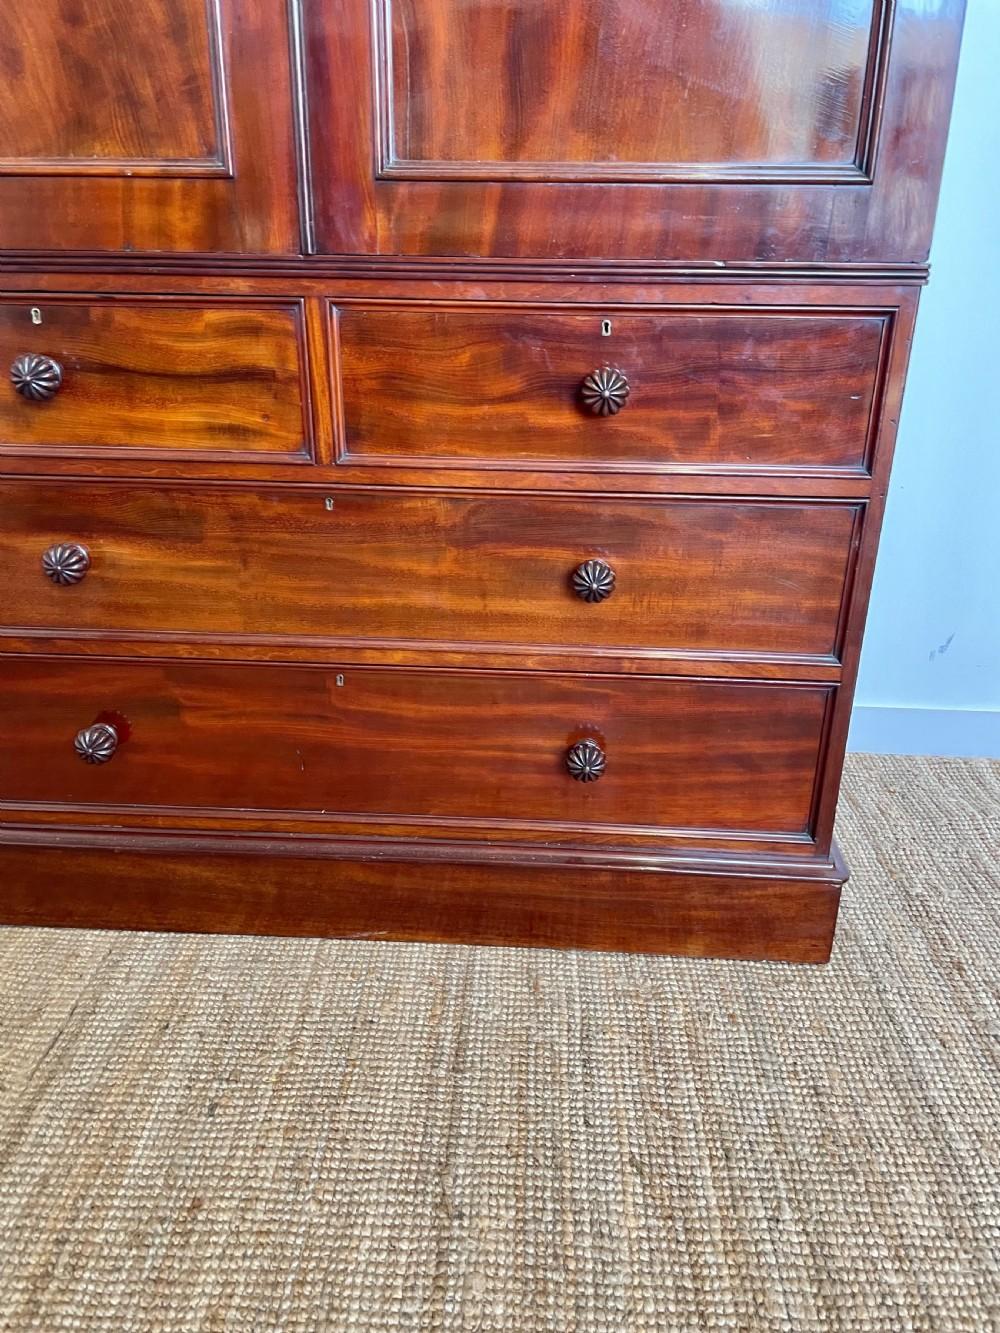 Very good quality mid 19th century flame mahogany linen press
English circa 1860’s , all original slides , working lock and key the drawers run smoothly
This been has been through our workshops and been checked over . Waxed / buffed
Comes into 3